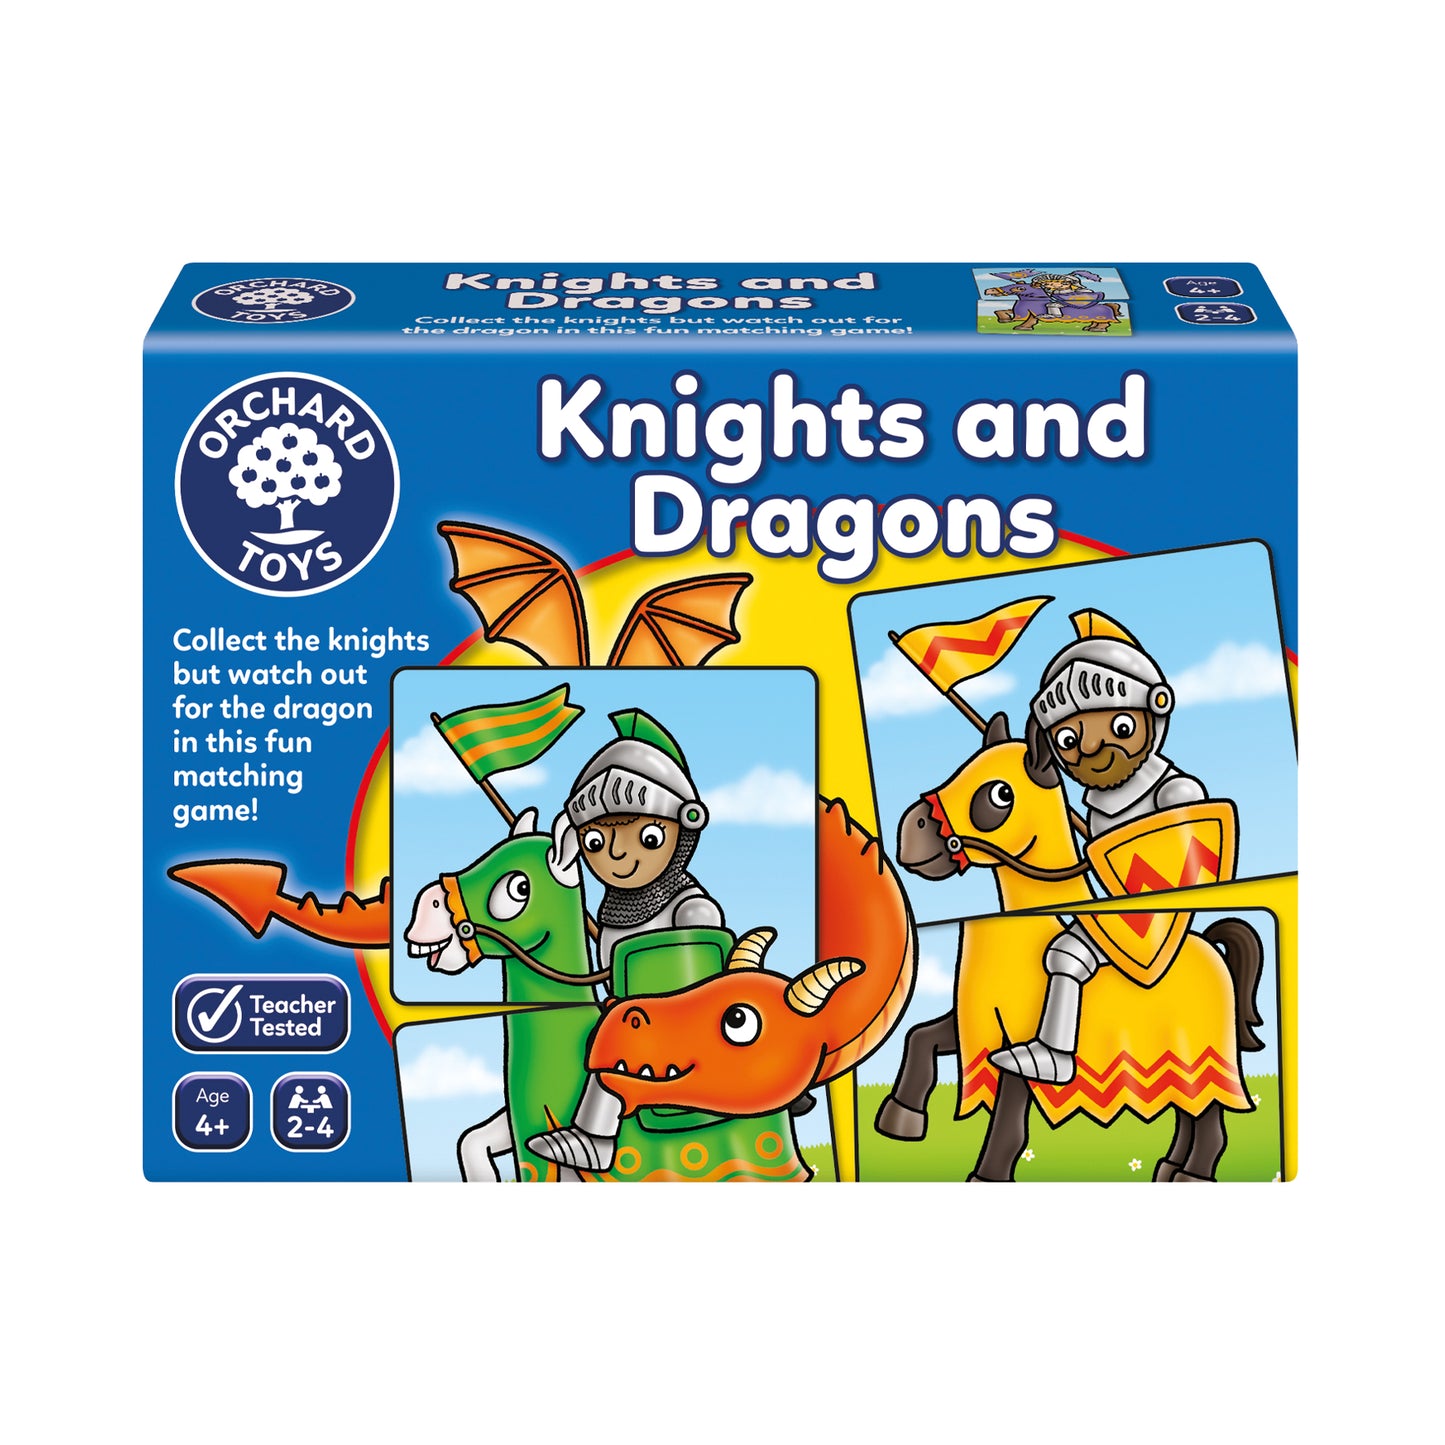 Orchard Toys Knights and Dragons Memory & Matching Game 騎士與龍 記憶與配對遊戲